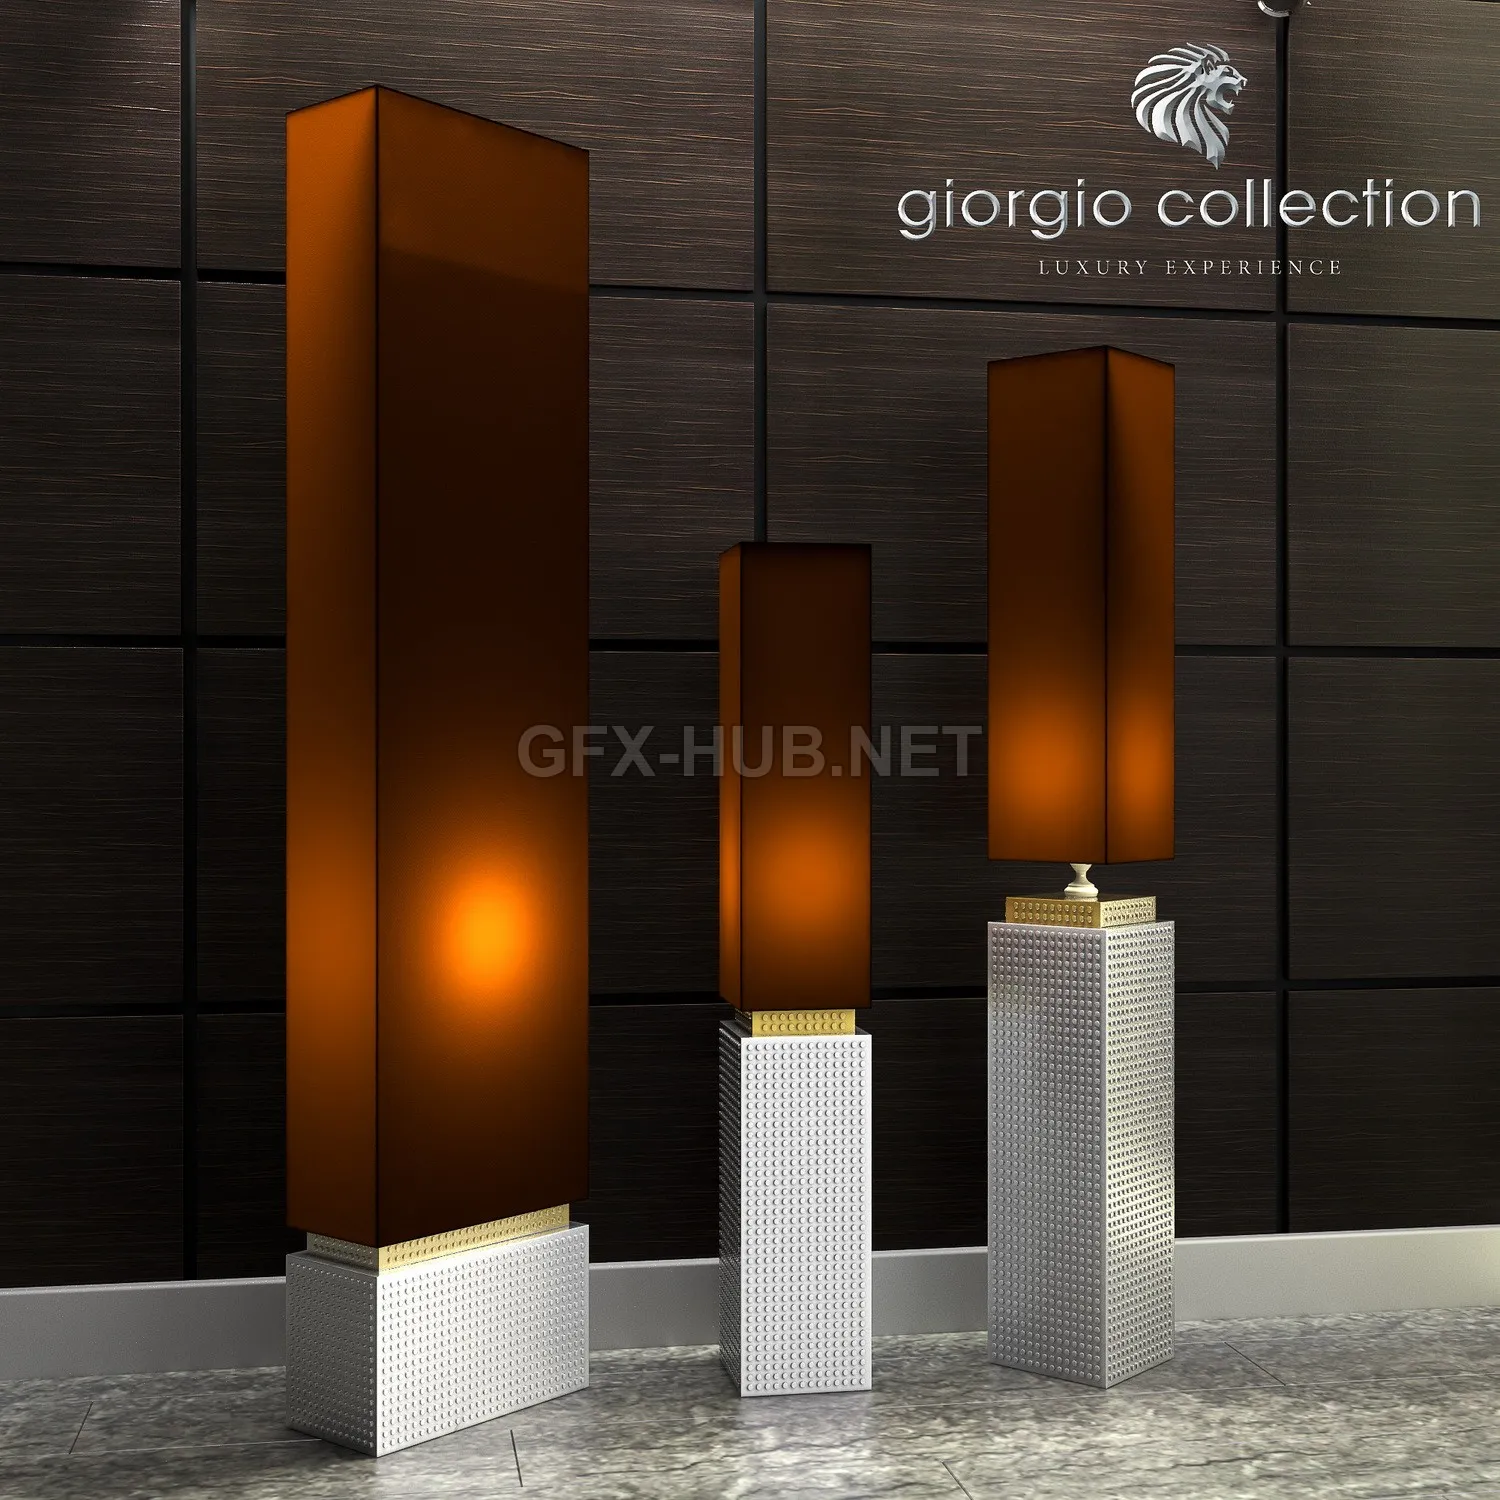 FURNITURE 3D MODELS – Giorgio Collection City LAMP